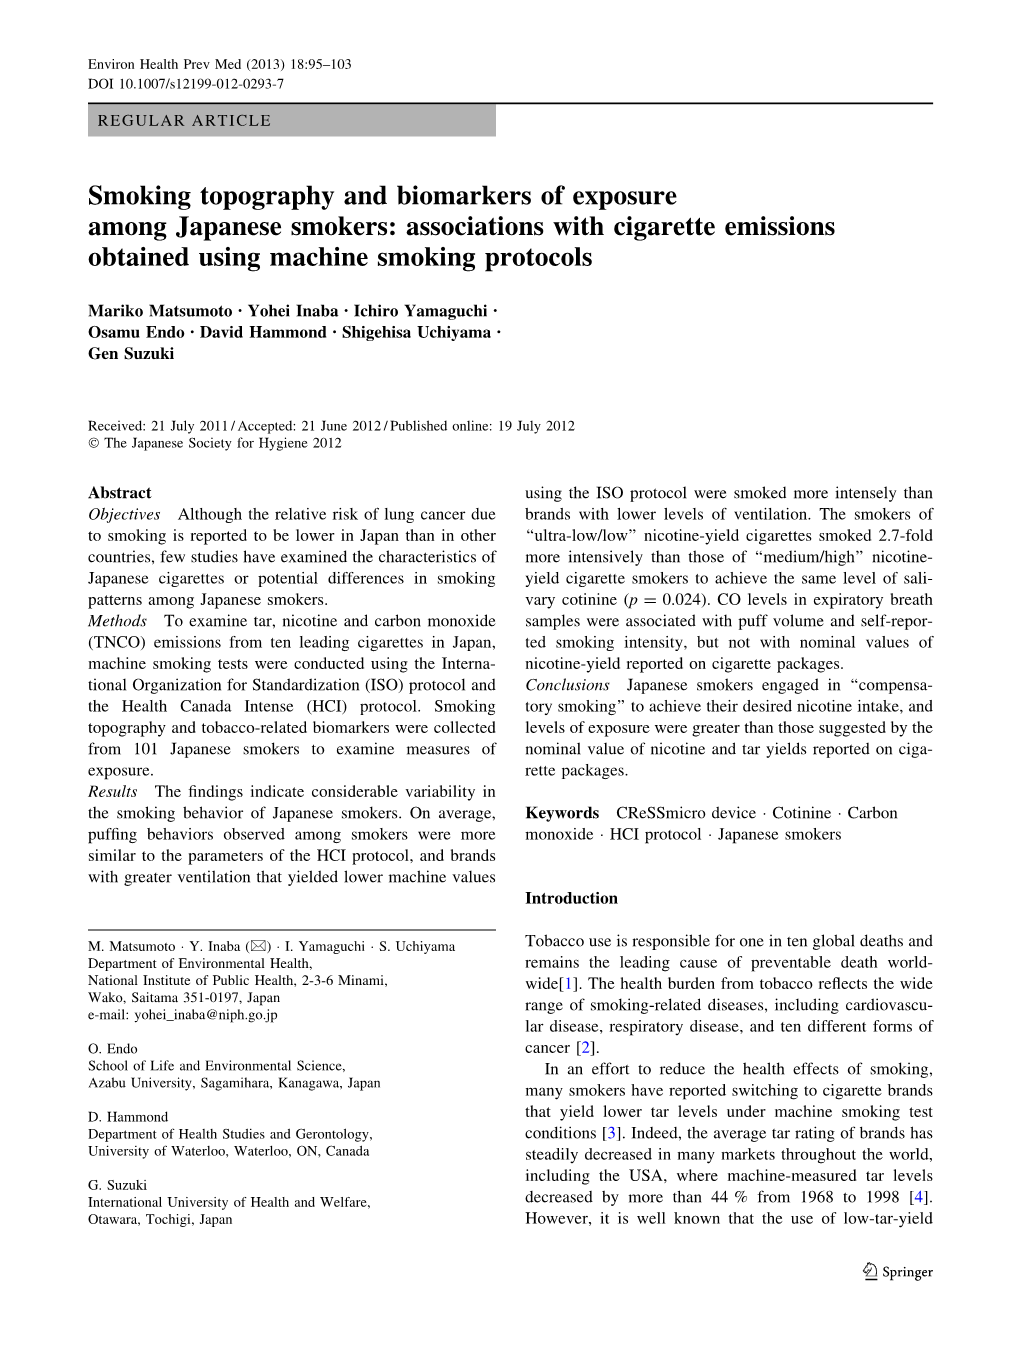 Smoking Topography and Biomarkers of Exposure Among Japanese Smokers: Associations with Cigarette Emissions Obtained Using Machine Smoking Protocols